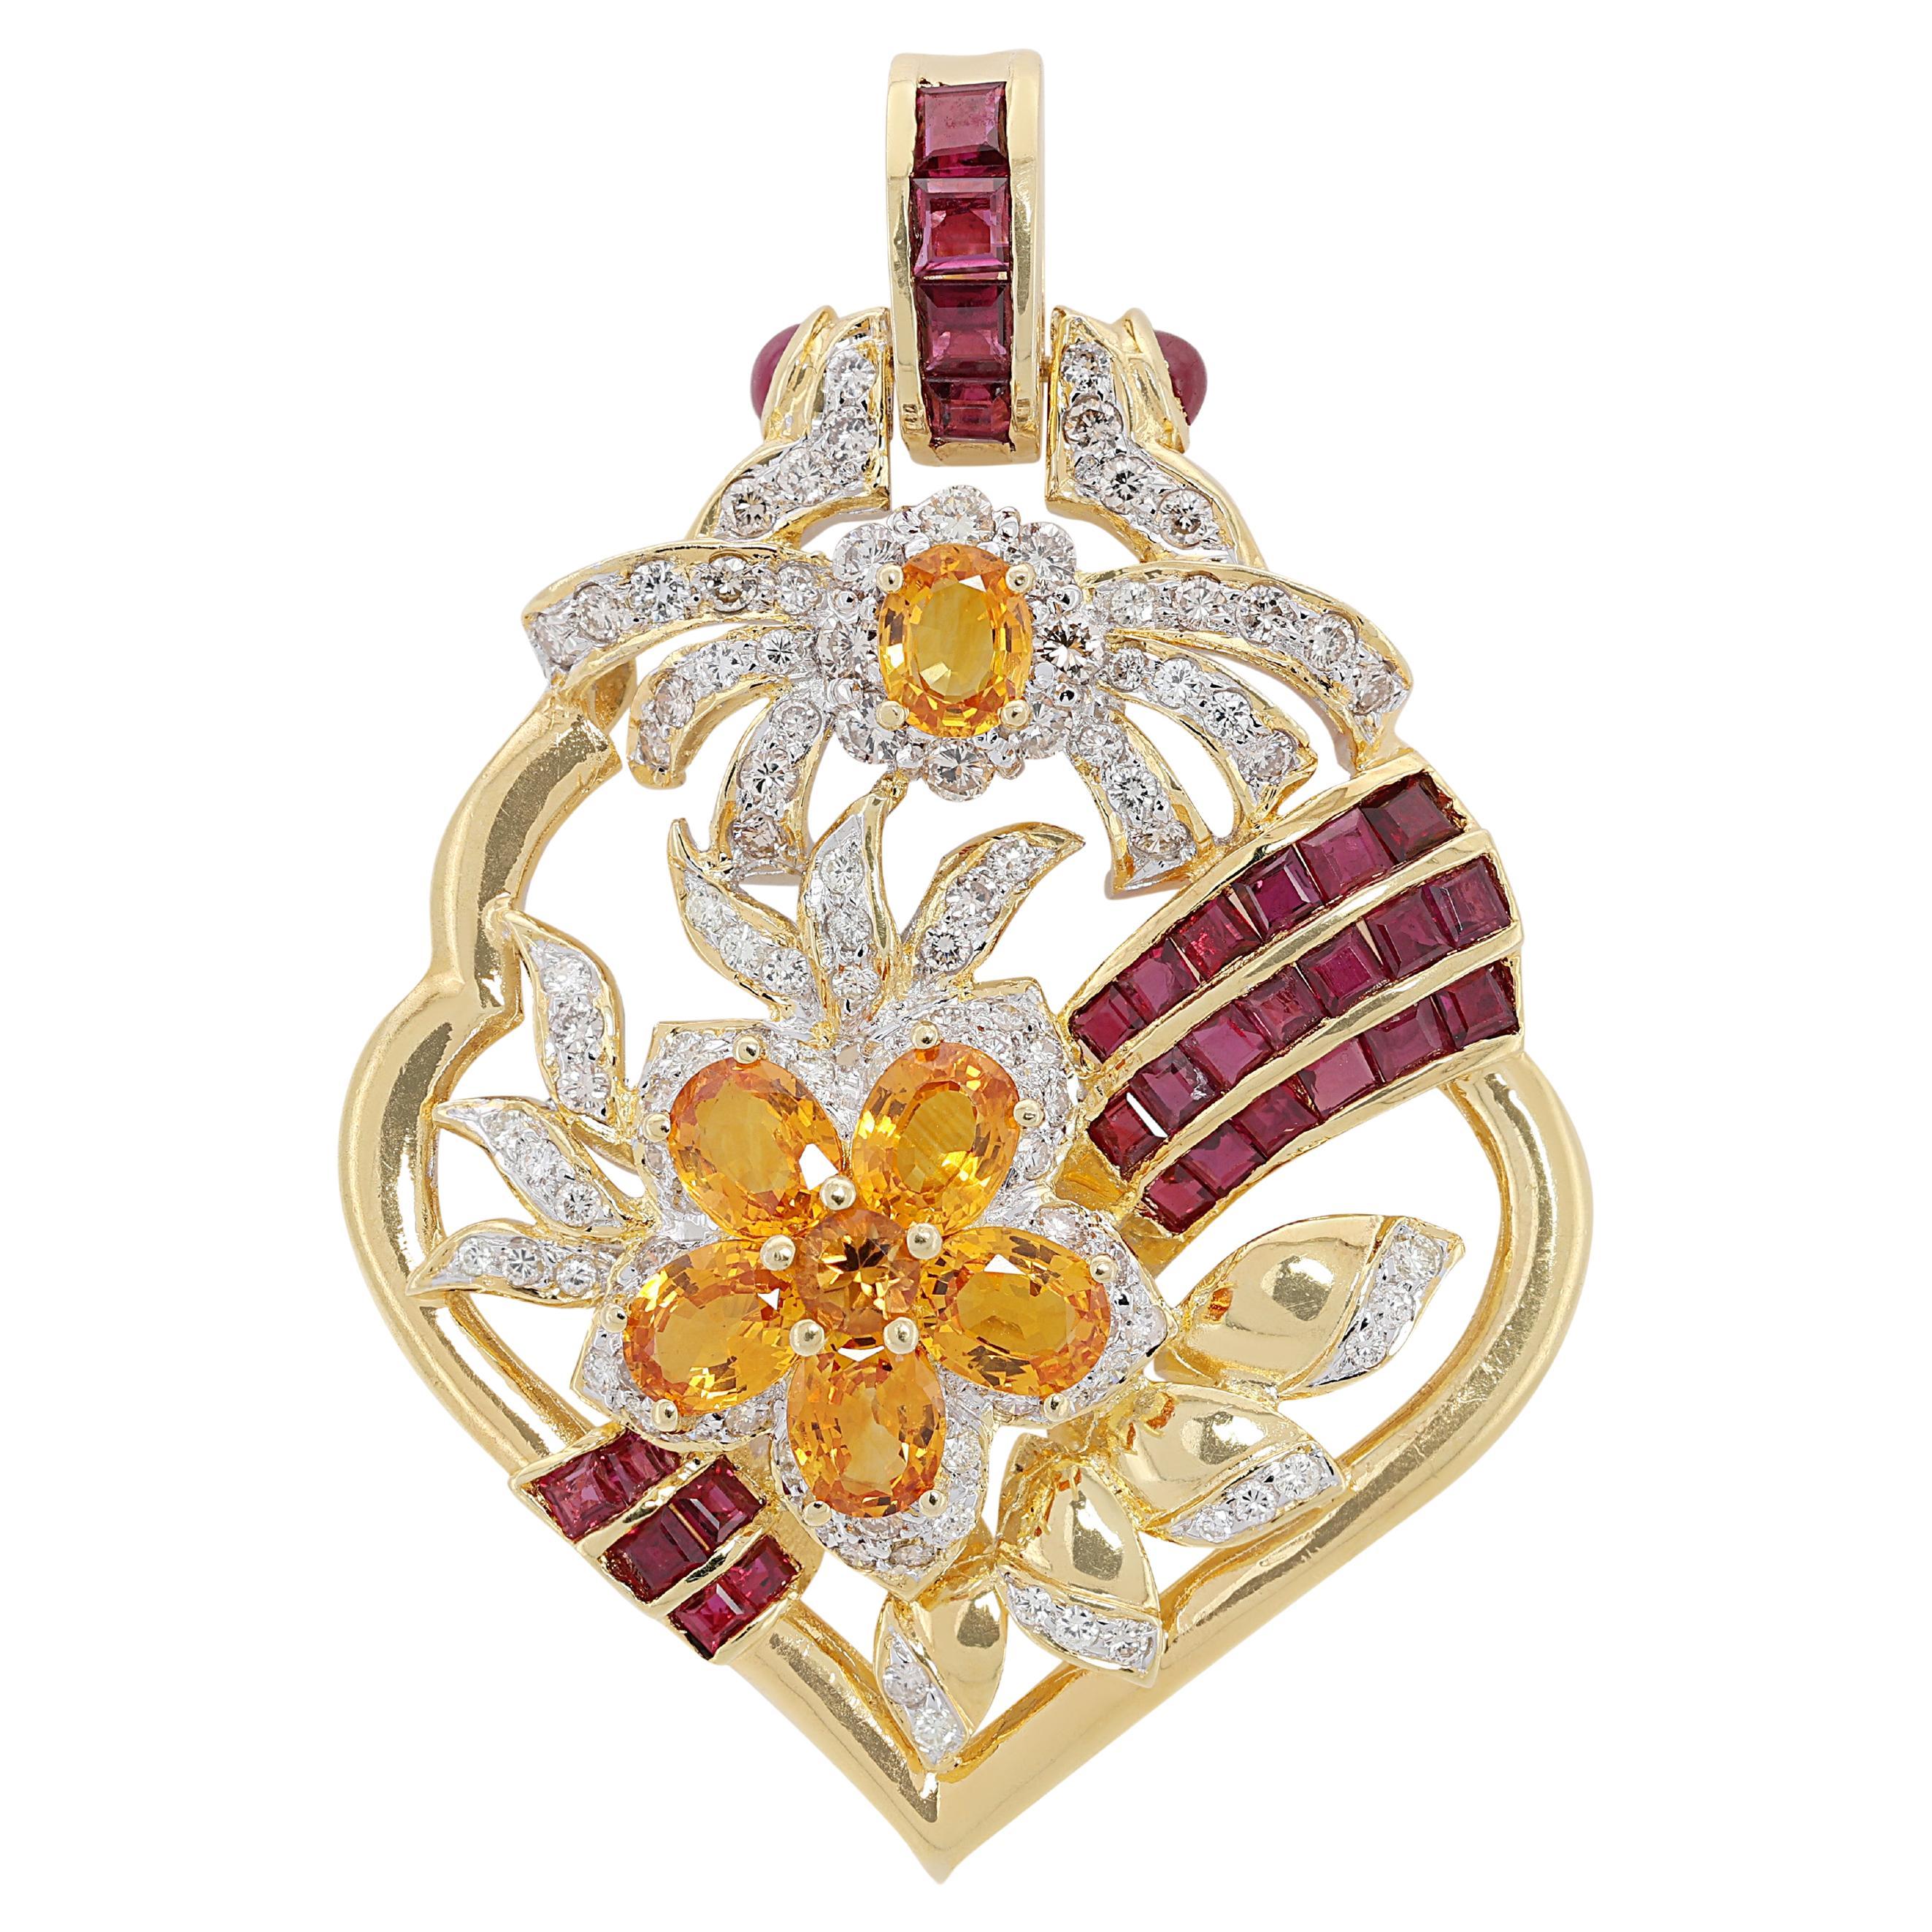 Beautiful 3.58ct Diamonds Pendant w/ Gems in 18K Yellow Gold- Chain not Included